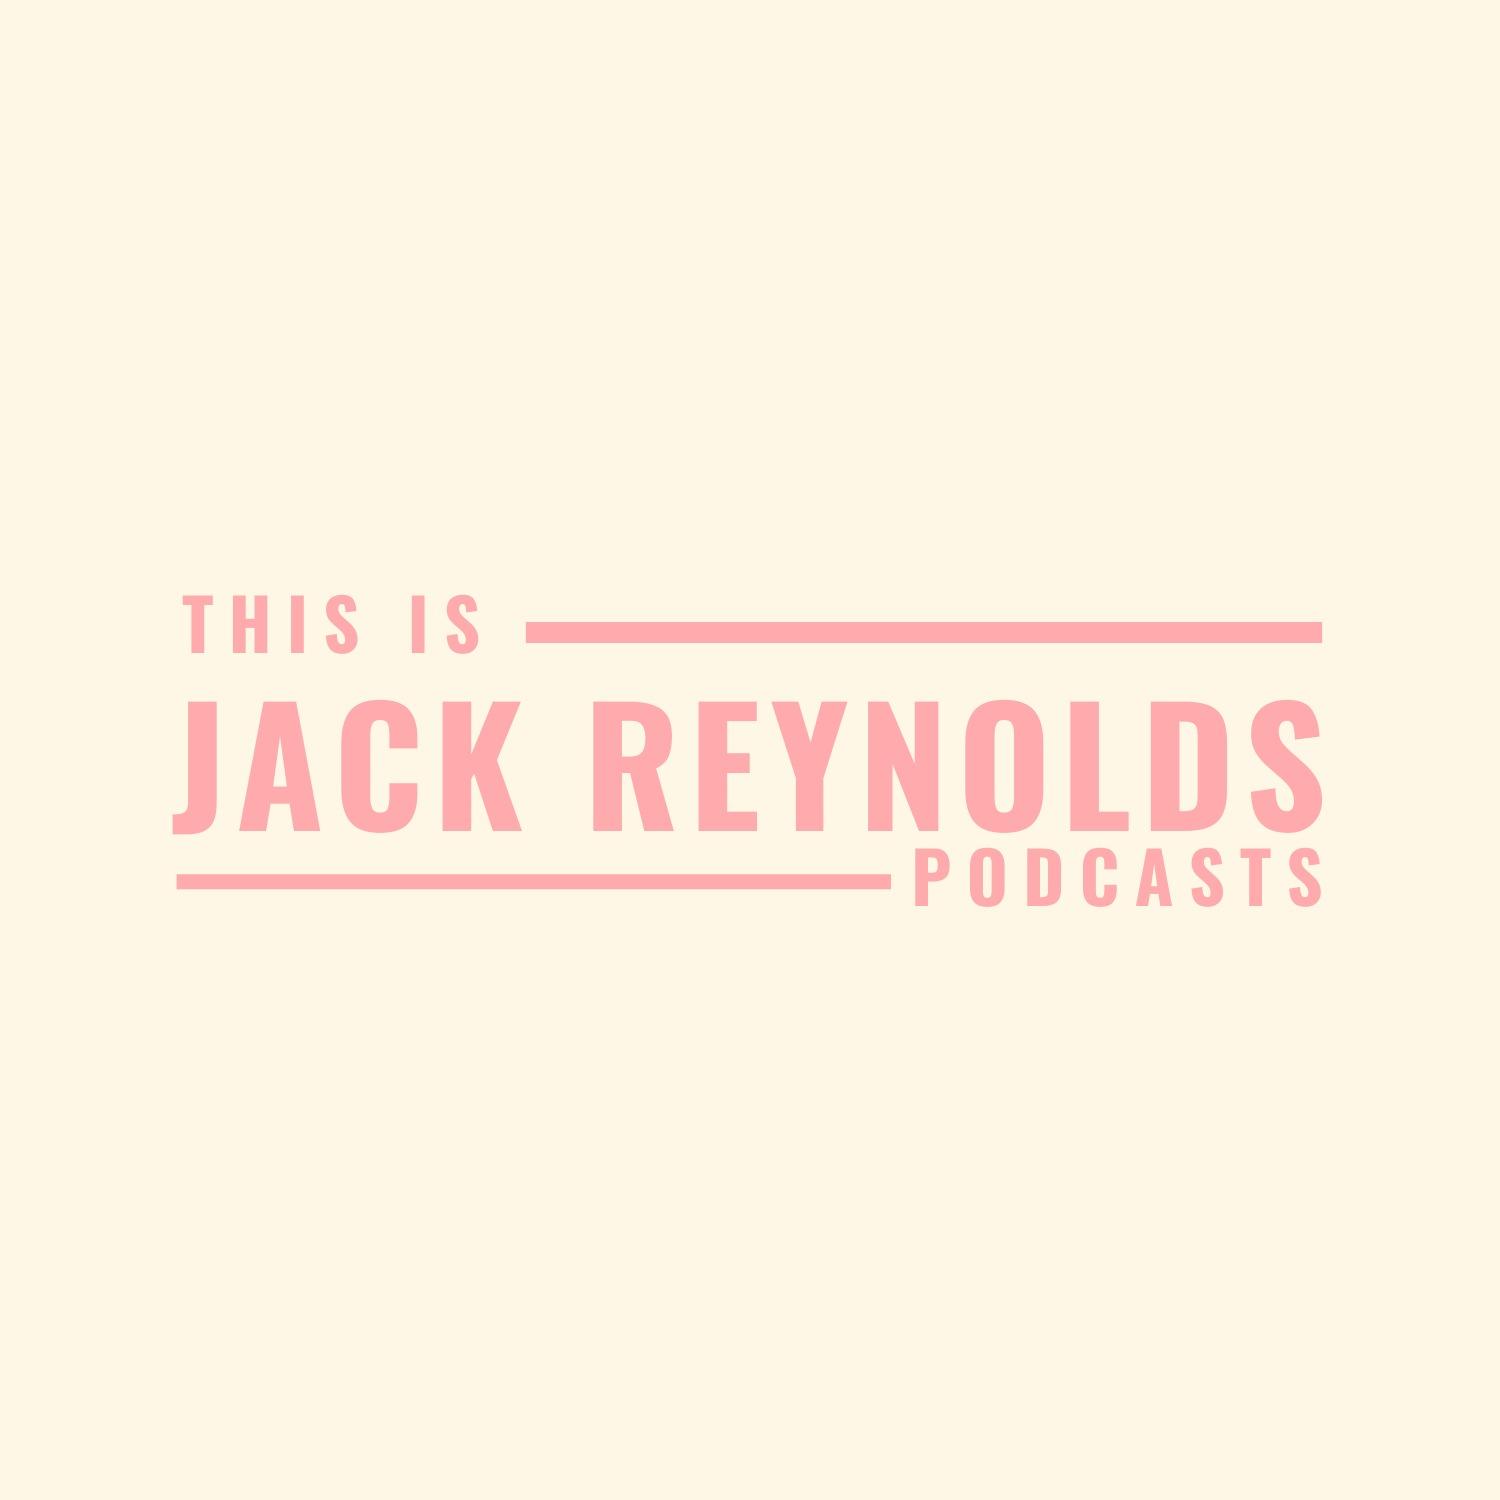 This Is: Jack Reynolds Podcasts